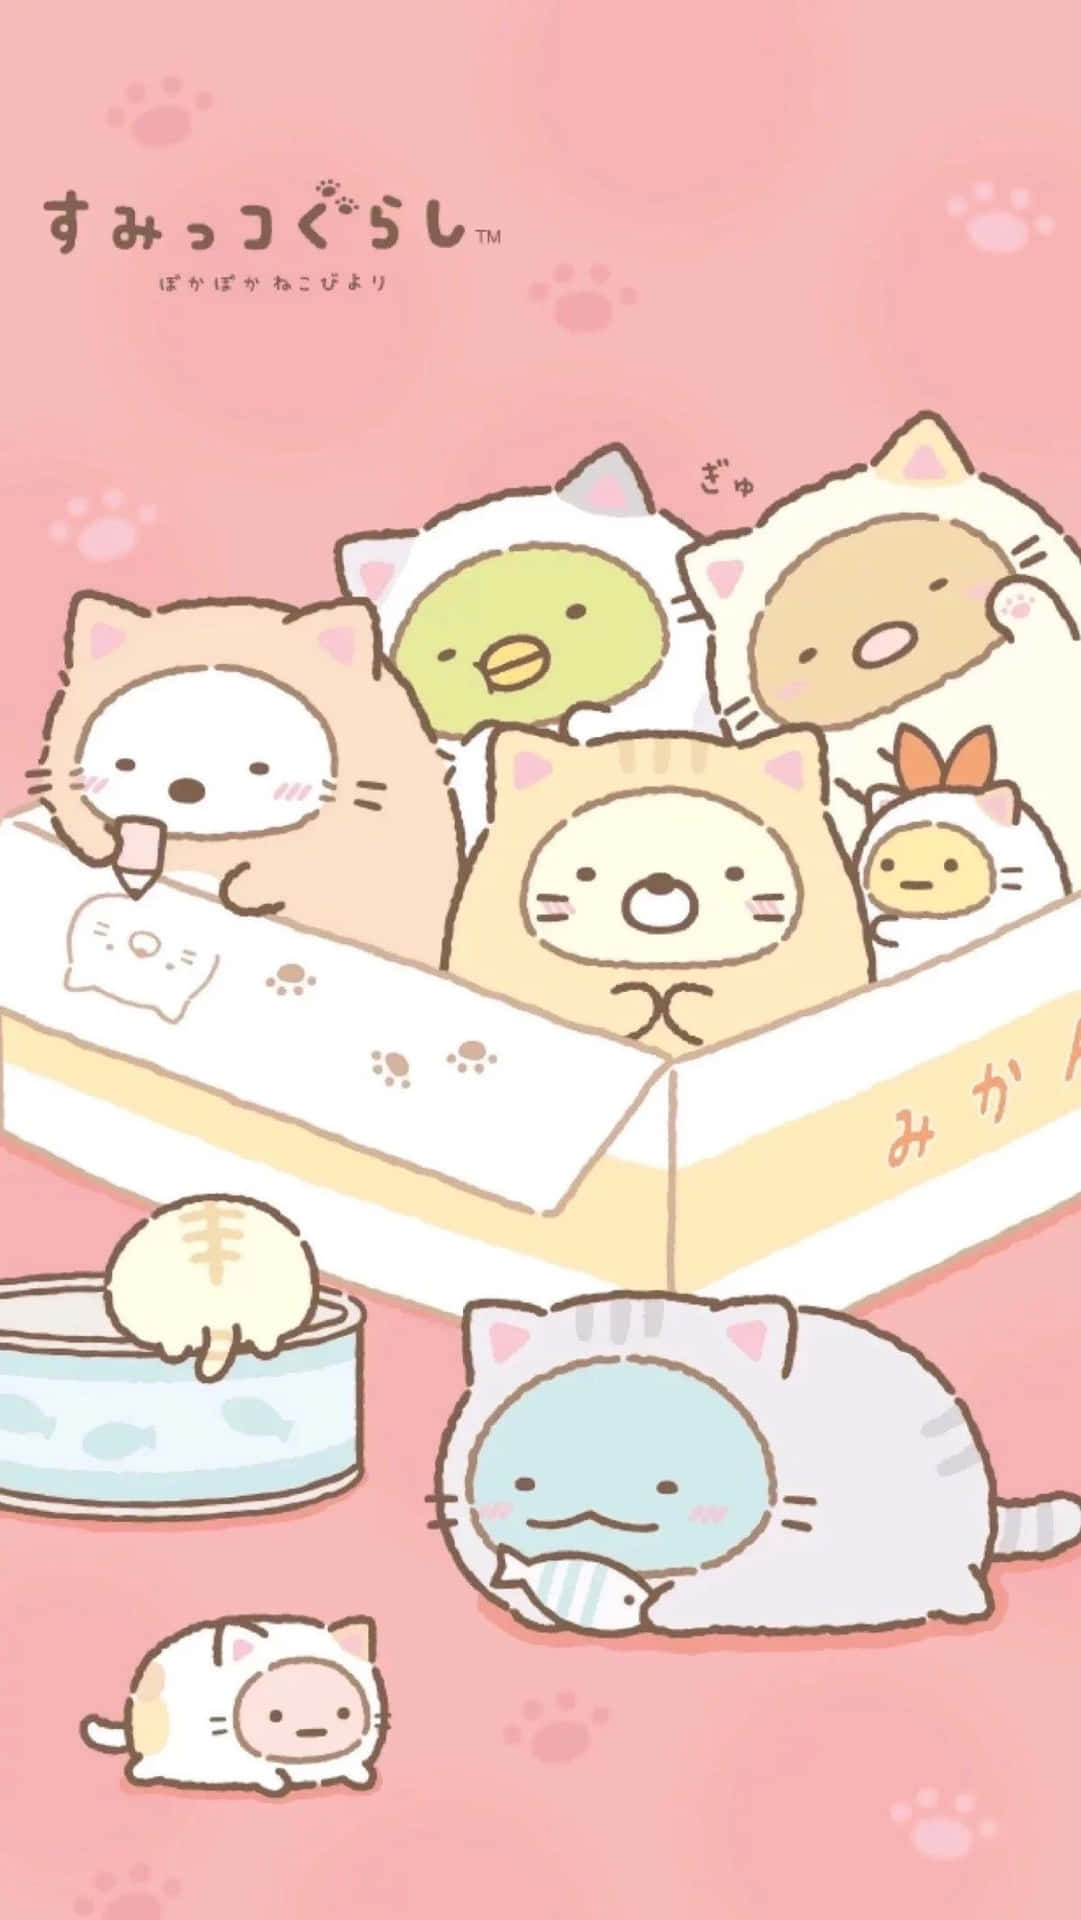 Brighten up your day with a touch of Kawaii Pastel Wallpaper